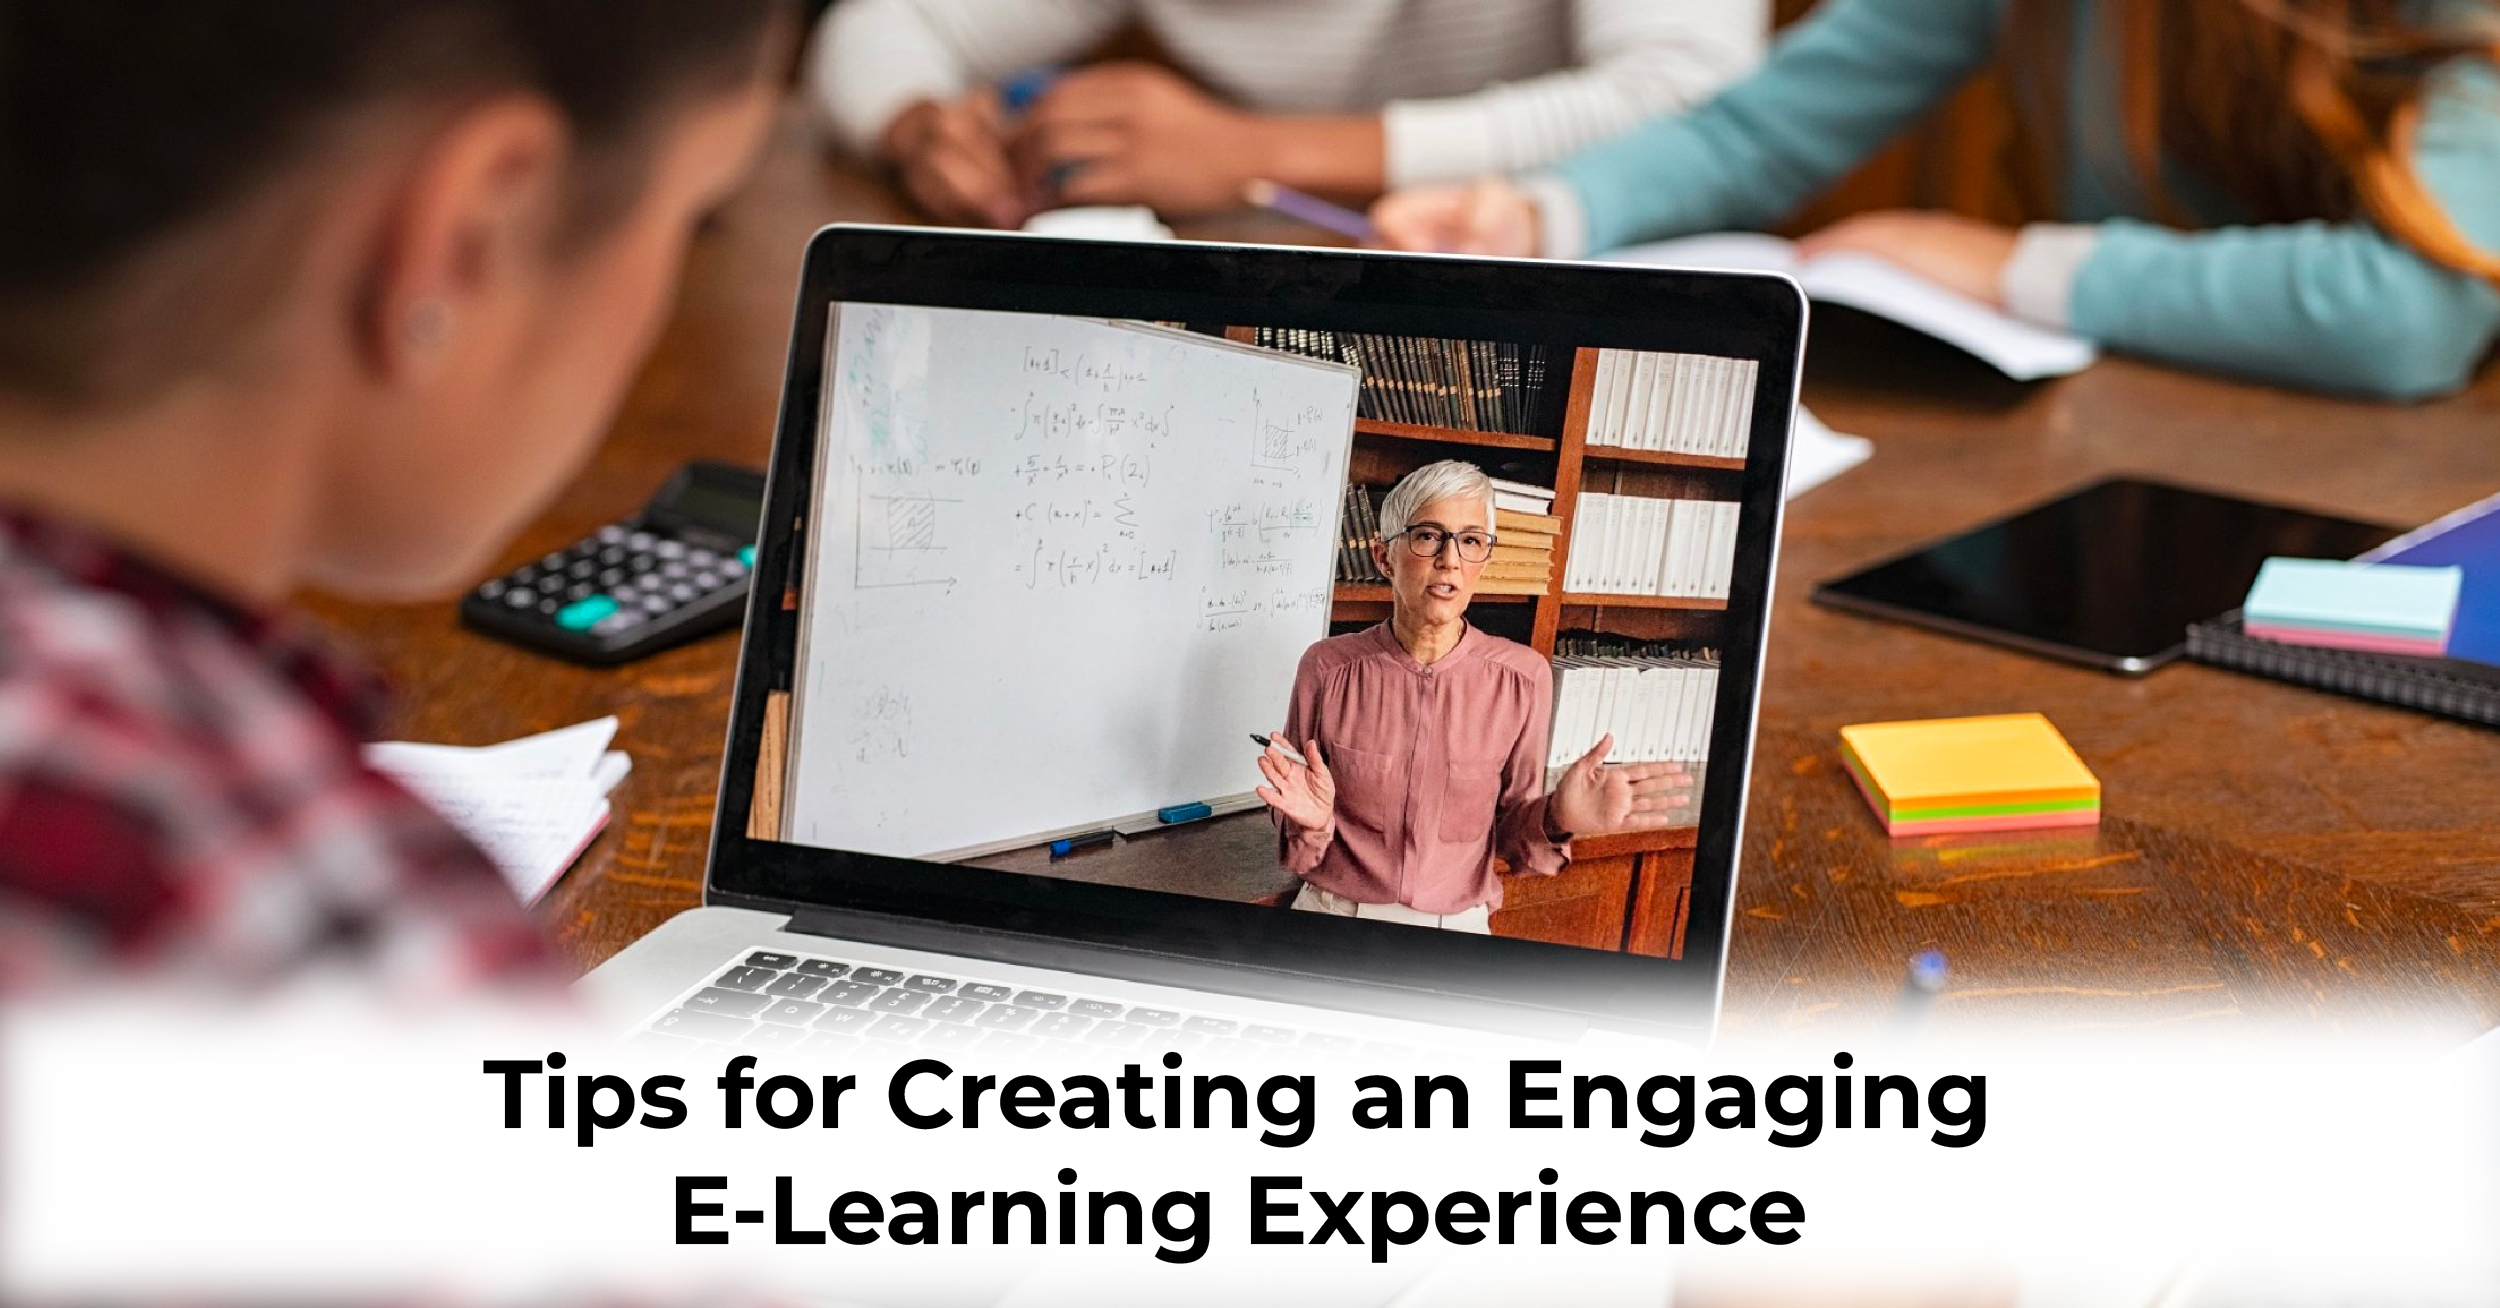 Tips for Creating an Engaging E-Learning Experience